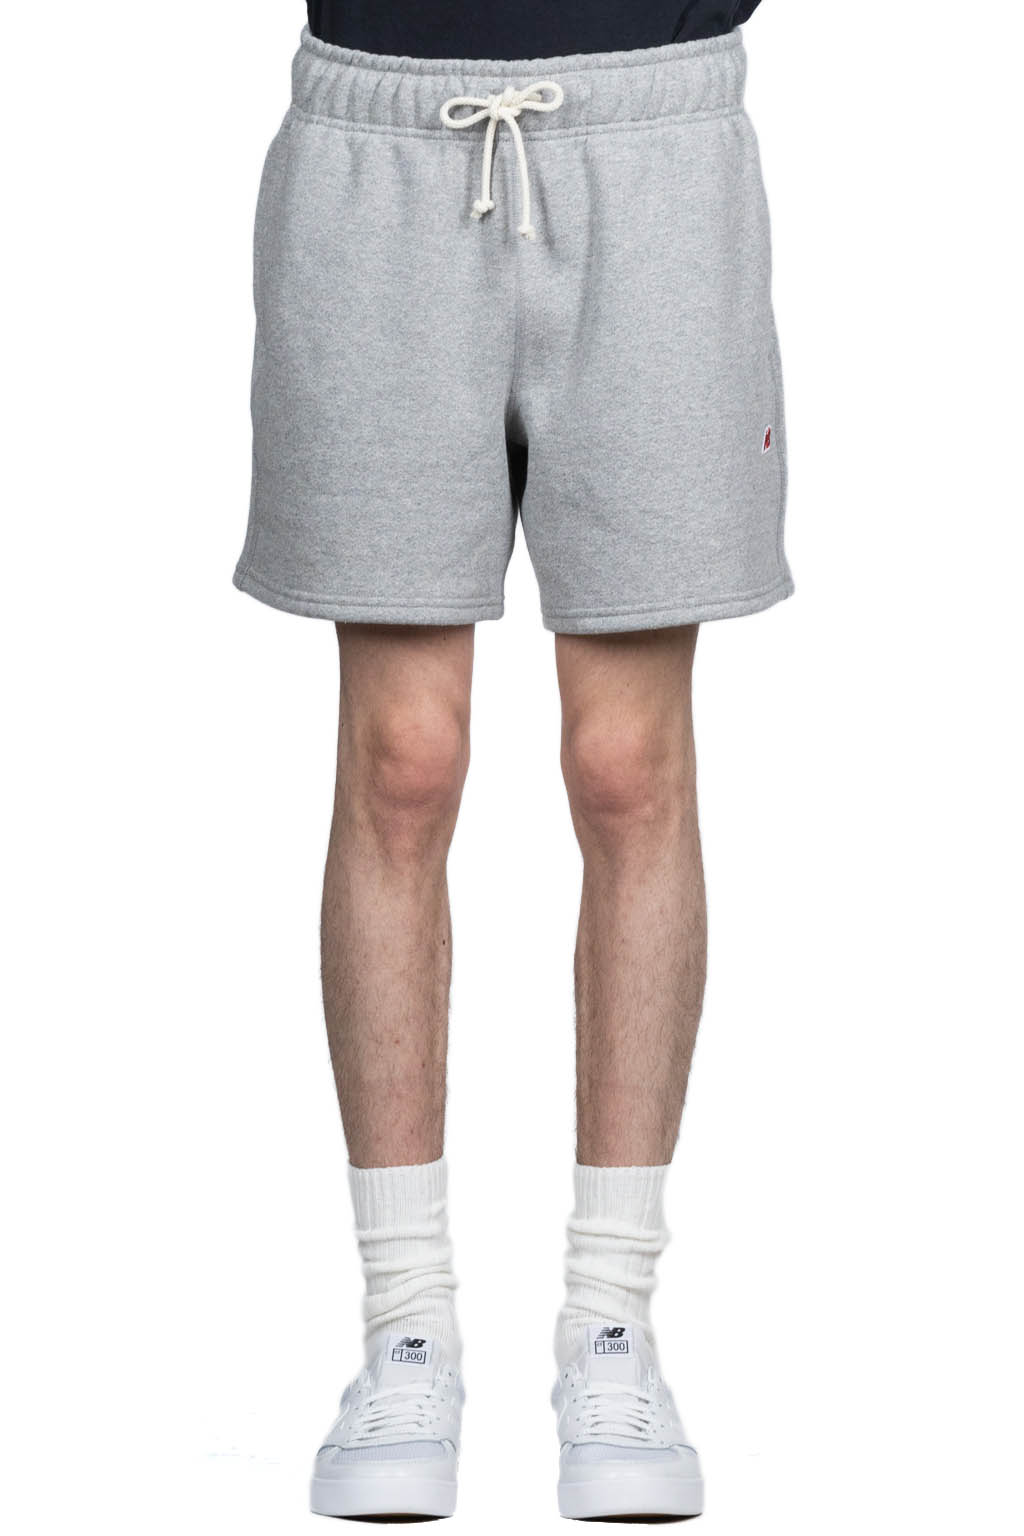 New Balance MADE in USA Core Short - Athletic Grey